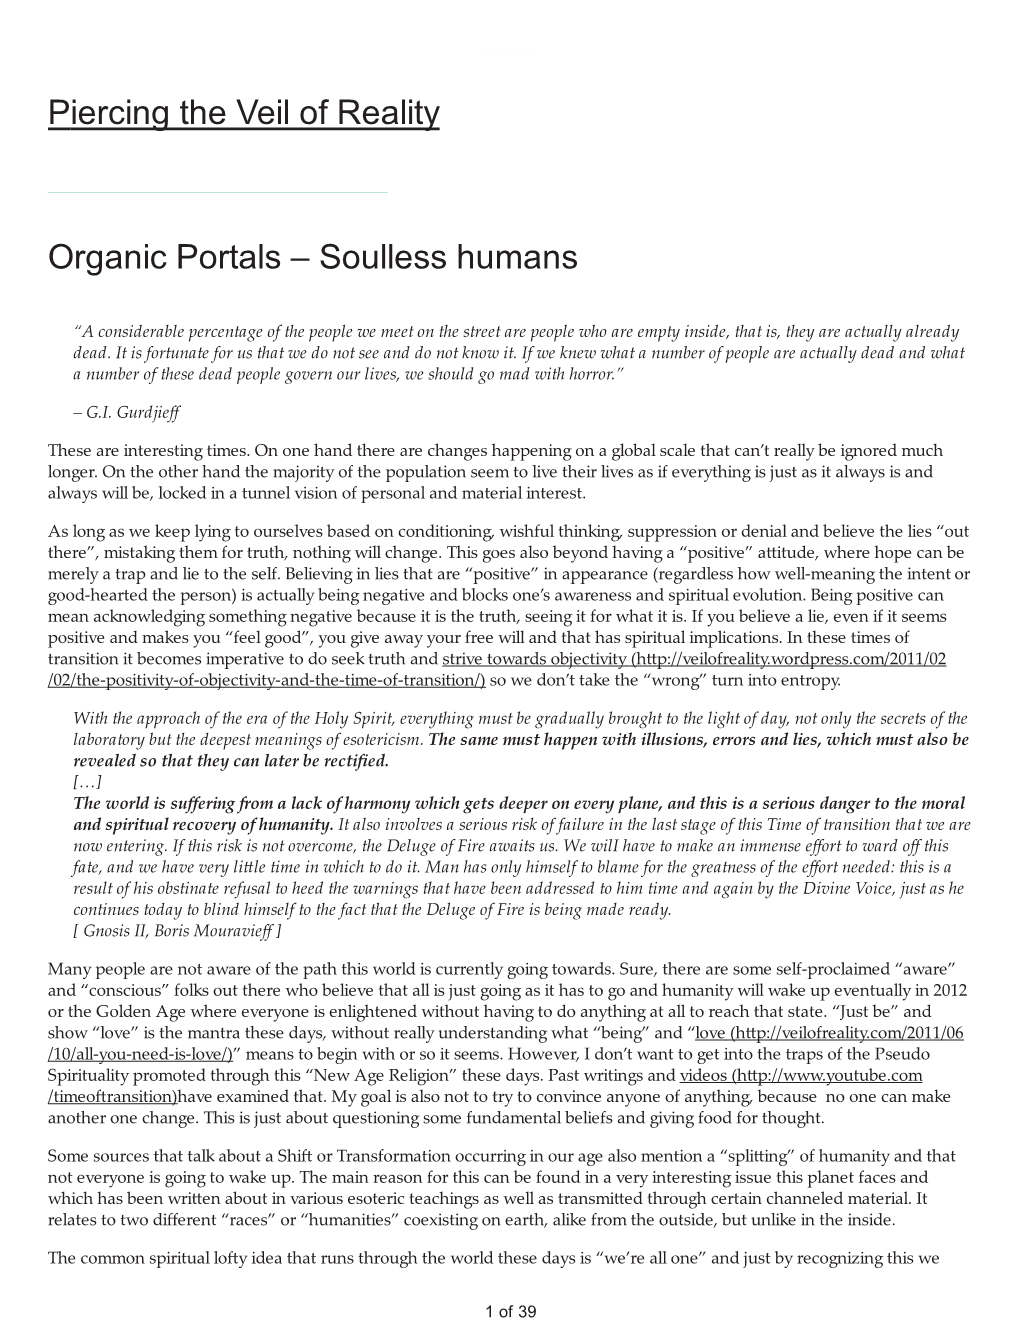 Organic Portals – Soulless Humans | Piercing the Veil of Reality